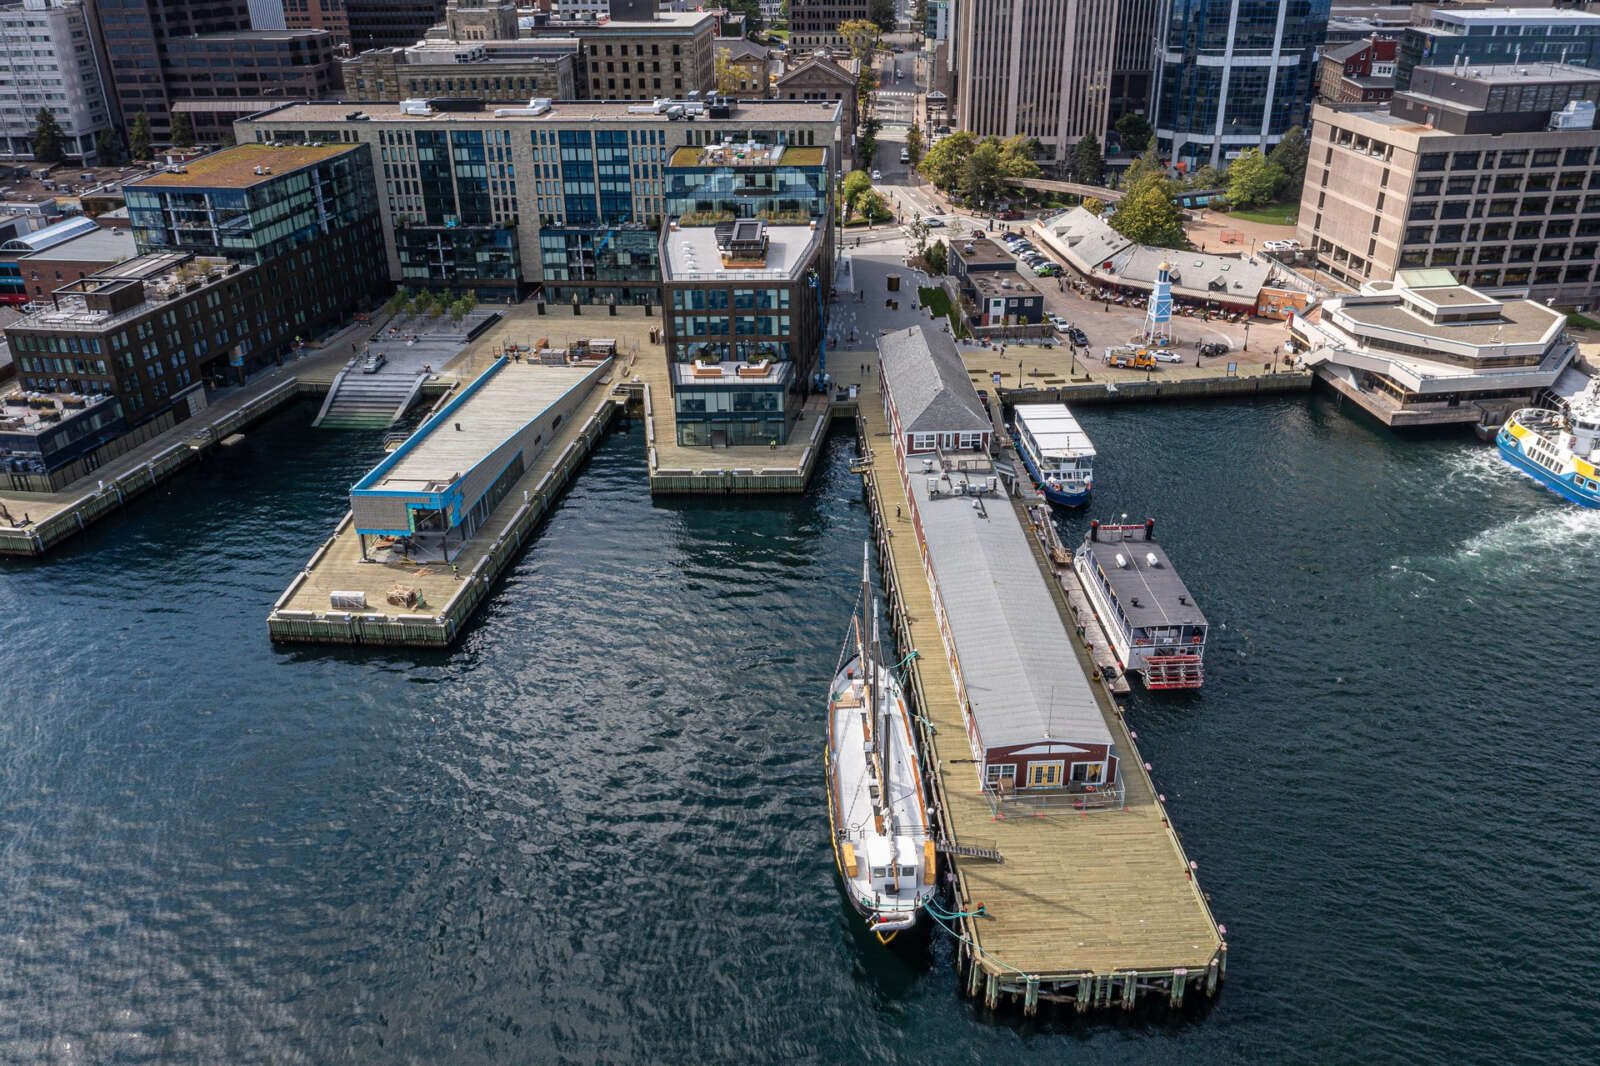 Aerial photo of city waterfront with wharfs, boats and buildings